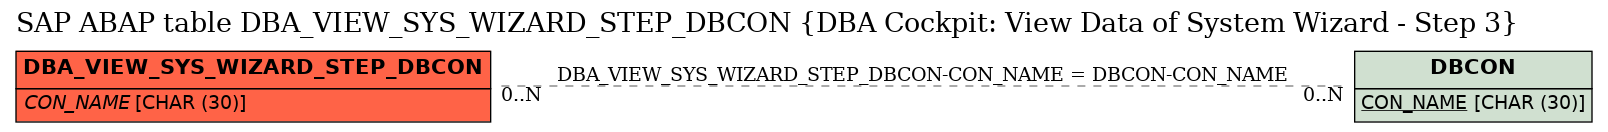 E-R Diagram for table DBA_VIEW_SYS_WIZARD_STEP_DBCON (DBA Cockpit: View Data of System Wizard - Step 3)